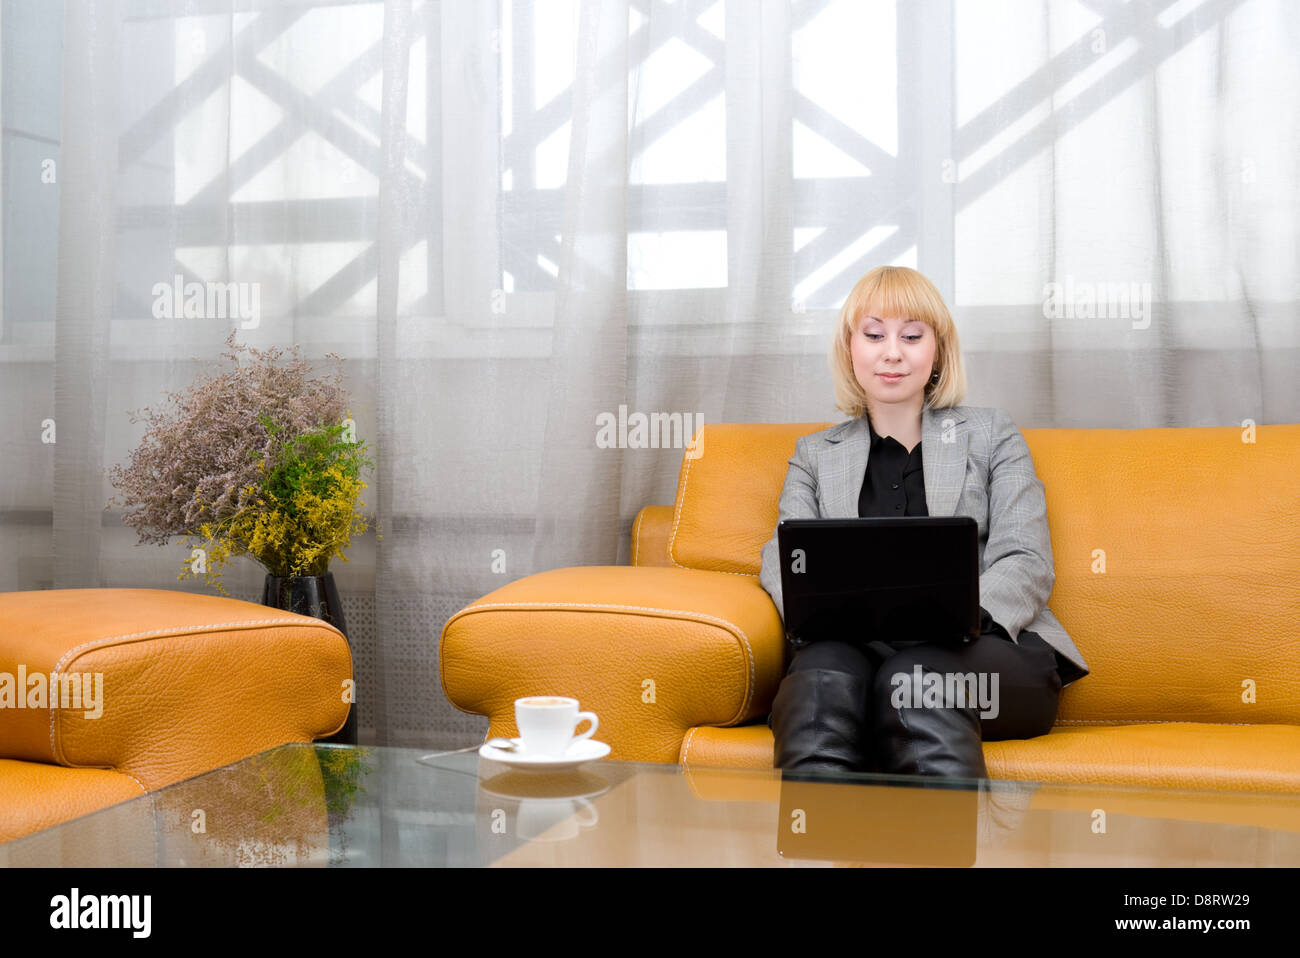 Blonde woman with laptop in comfort hall Banque D'Images